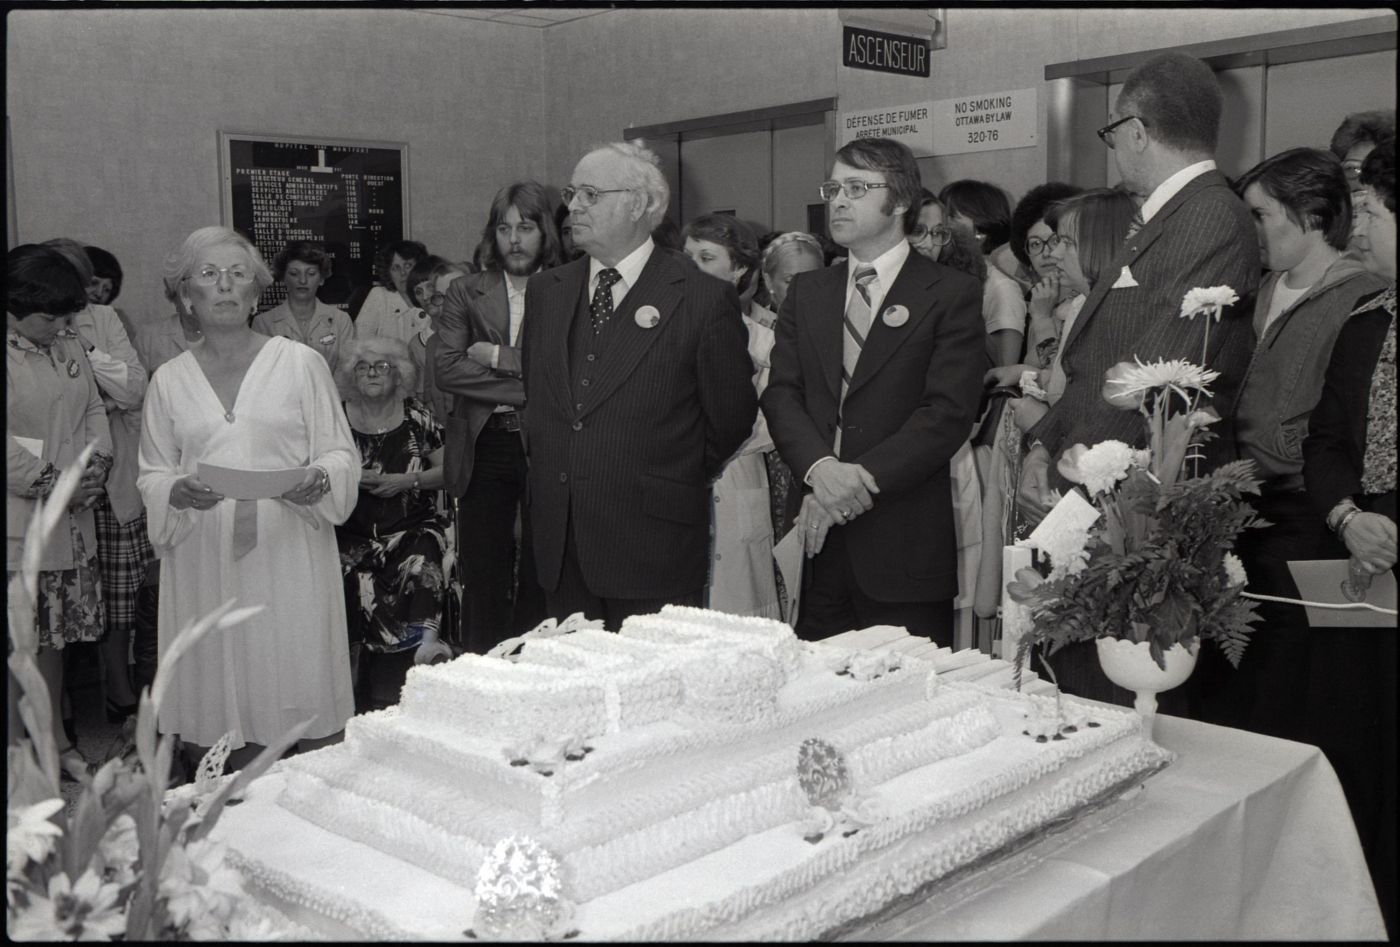 Black and white photograph of a group of people standing around a huge cake decorated with the logo of the Montfort Hospital. Two wreaths of flowers are placed on the table. In the foreground, three men in suits wearing the same button, and an elegantly dressed woman holding a sheaf of papers.